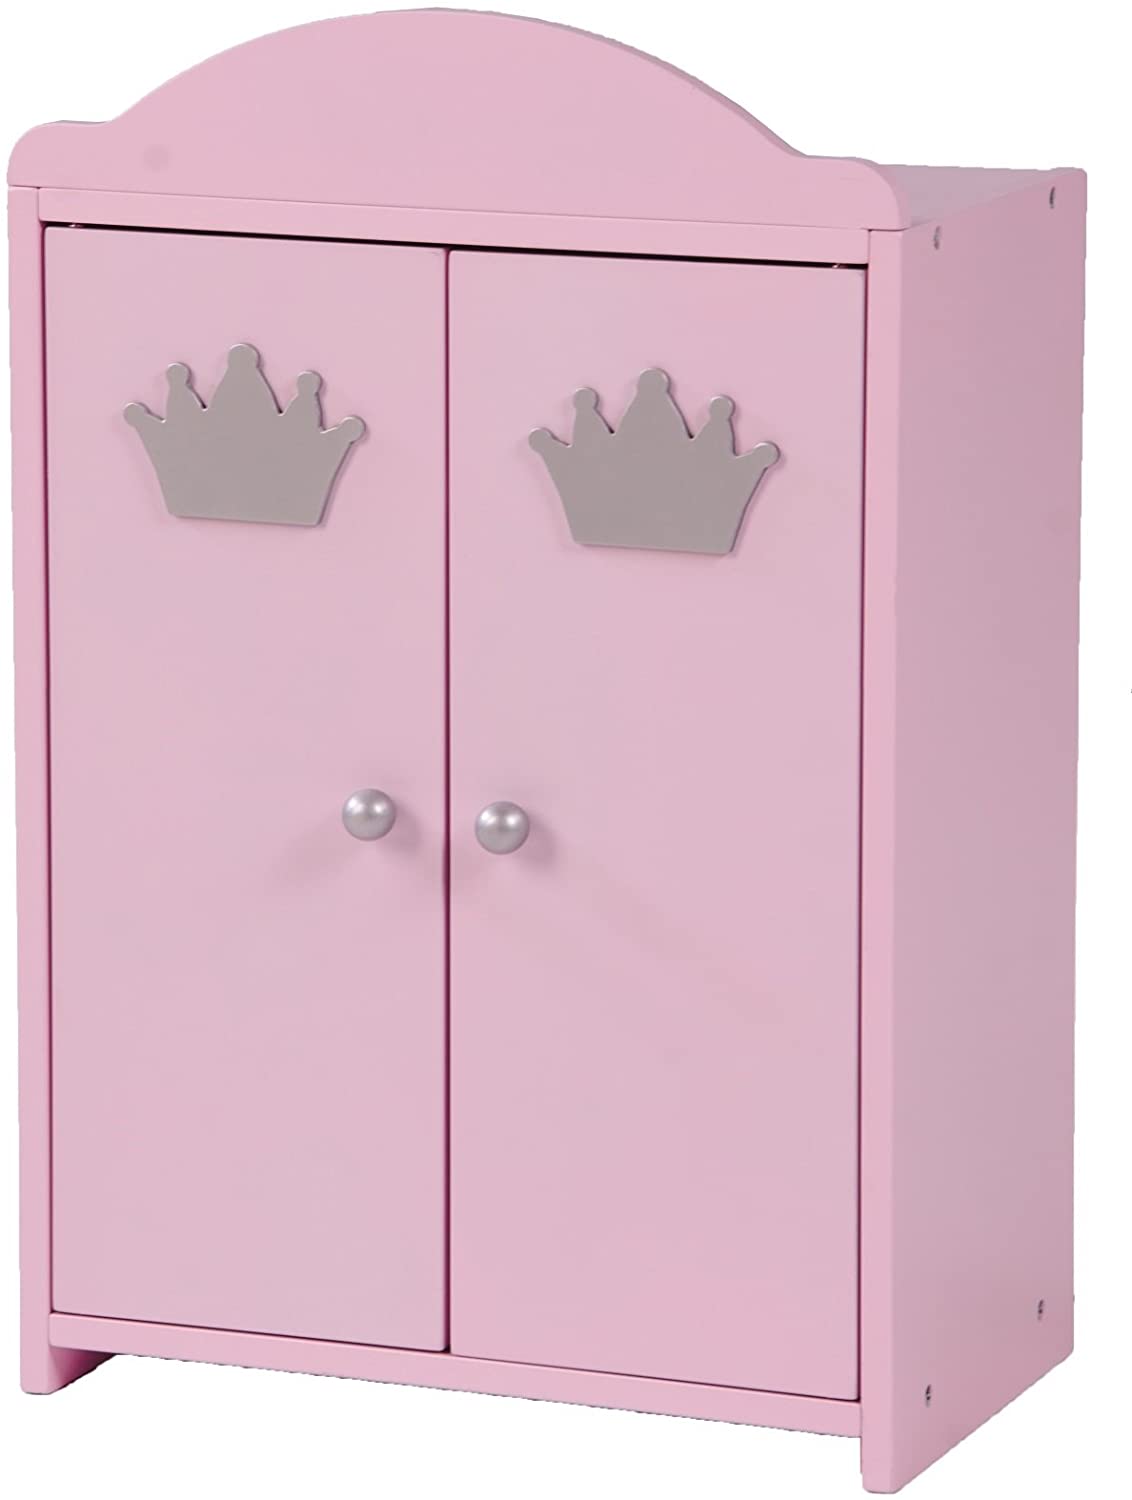 Roba Princess Sophie Doll House Furniture And Accessories Painted Pink Doll